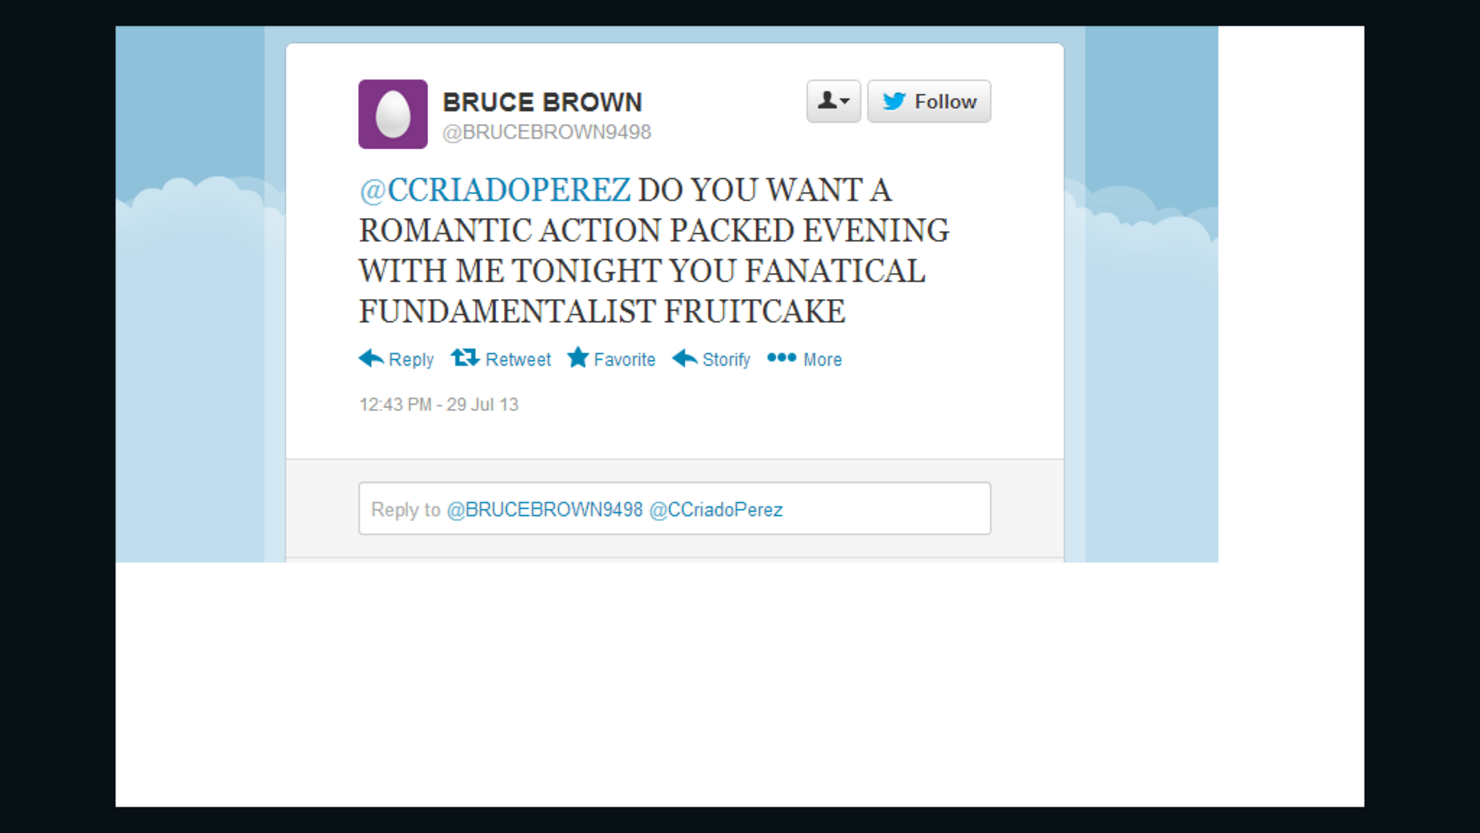 This tweet was sent to Caroline Criado-Perez after her successful campaign to honor a woman on British currency.